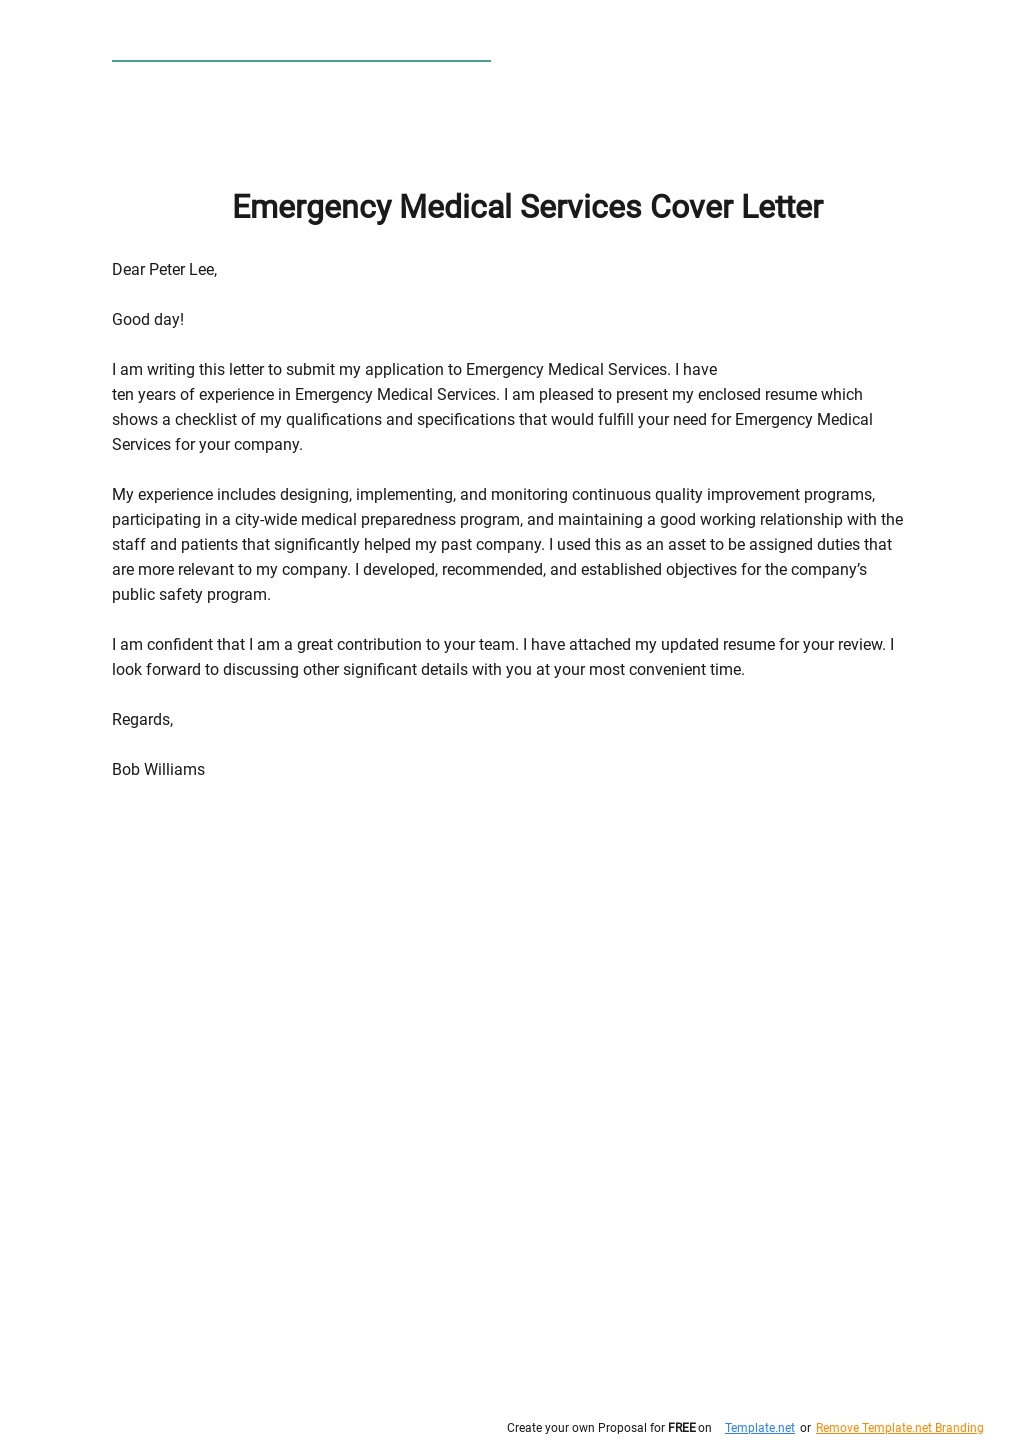 Emergency Medical Services Cover Letter Template.jpe